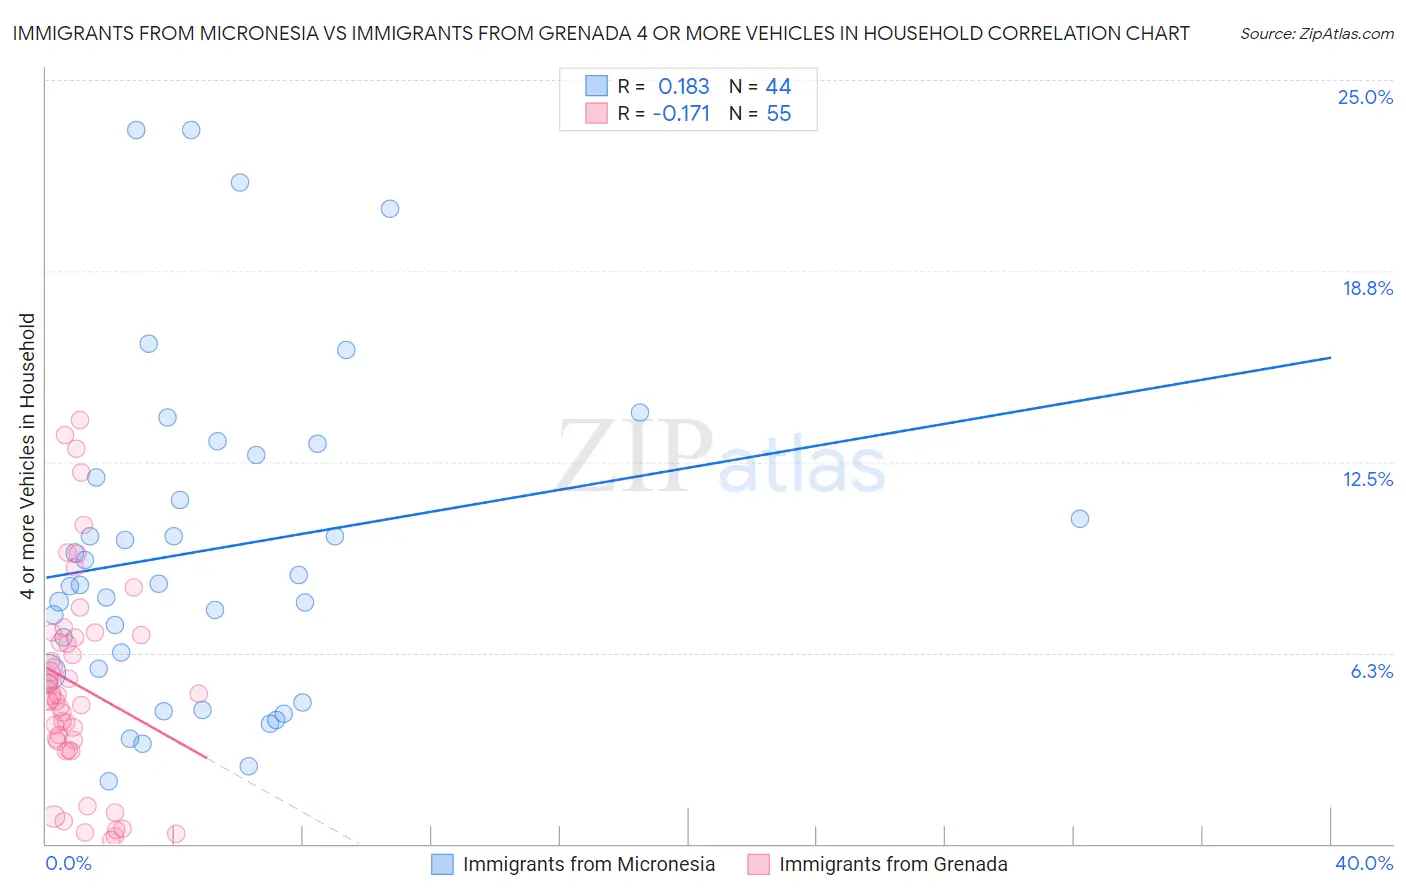 Immigrants from Micronesia vs Immigrants from Grenada 4 or more Vehicles in Household